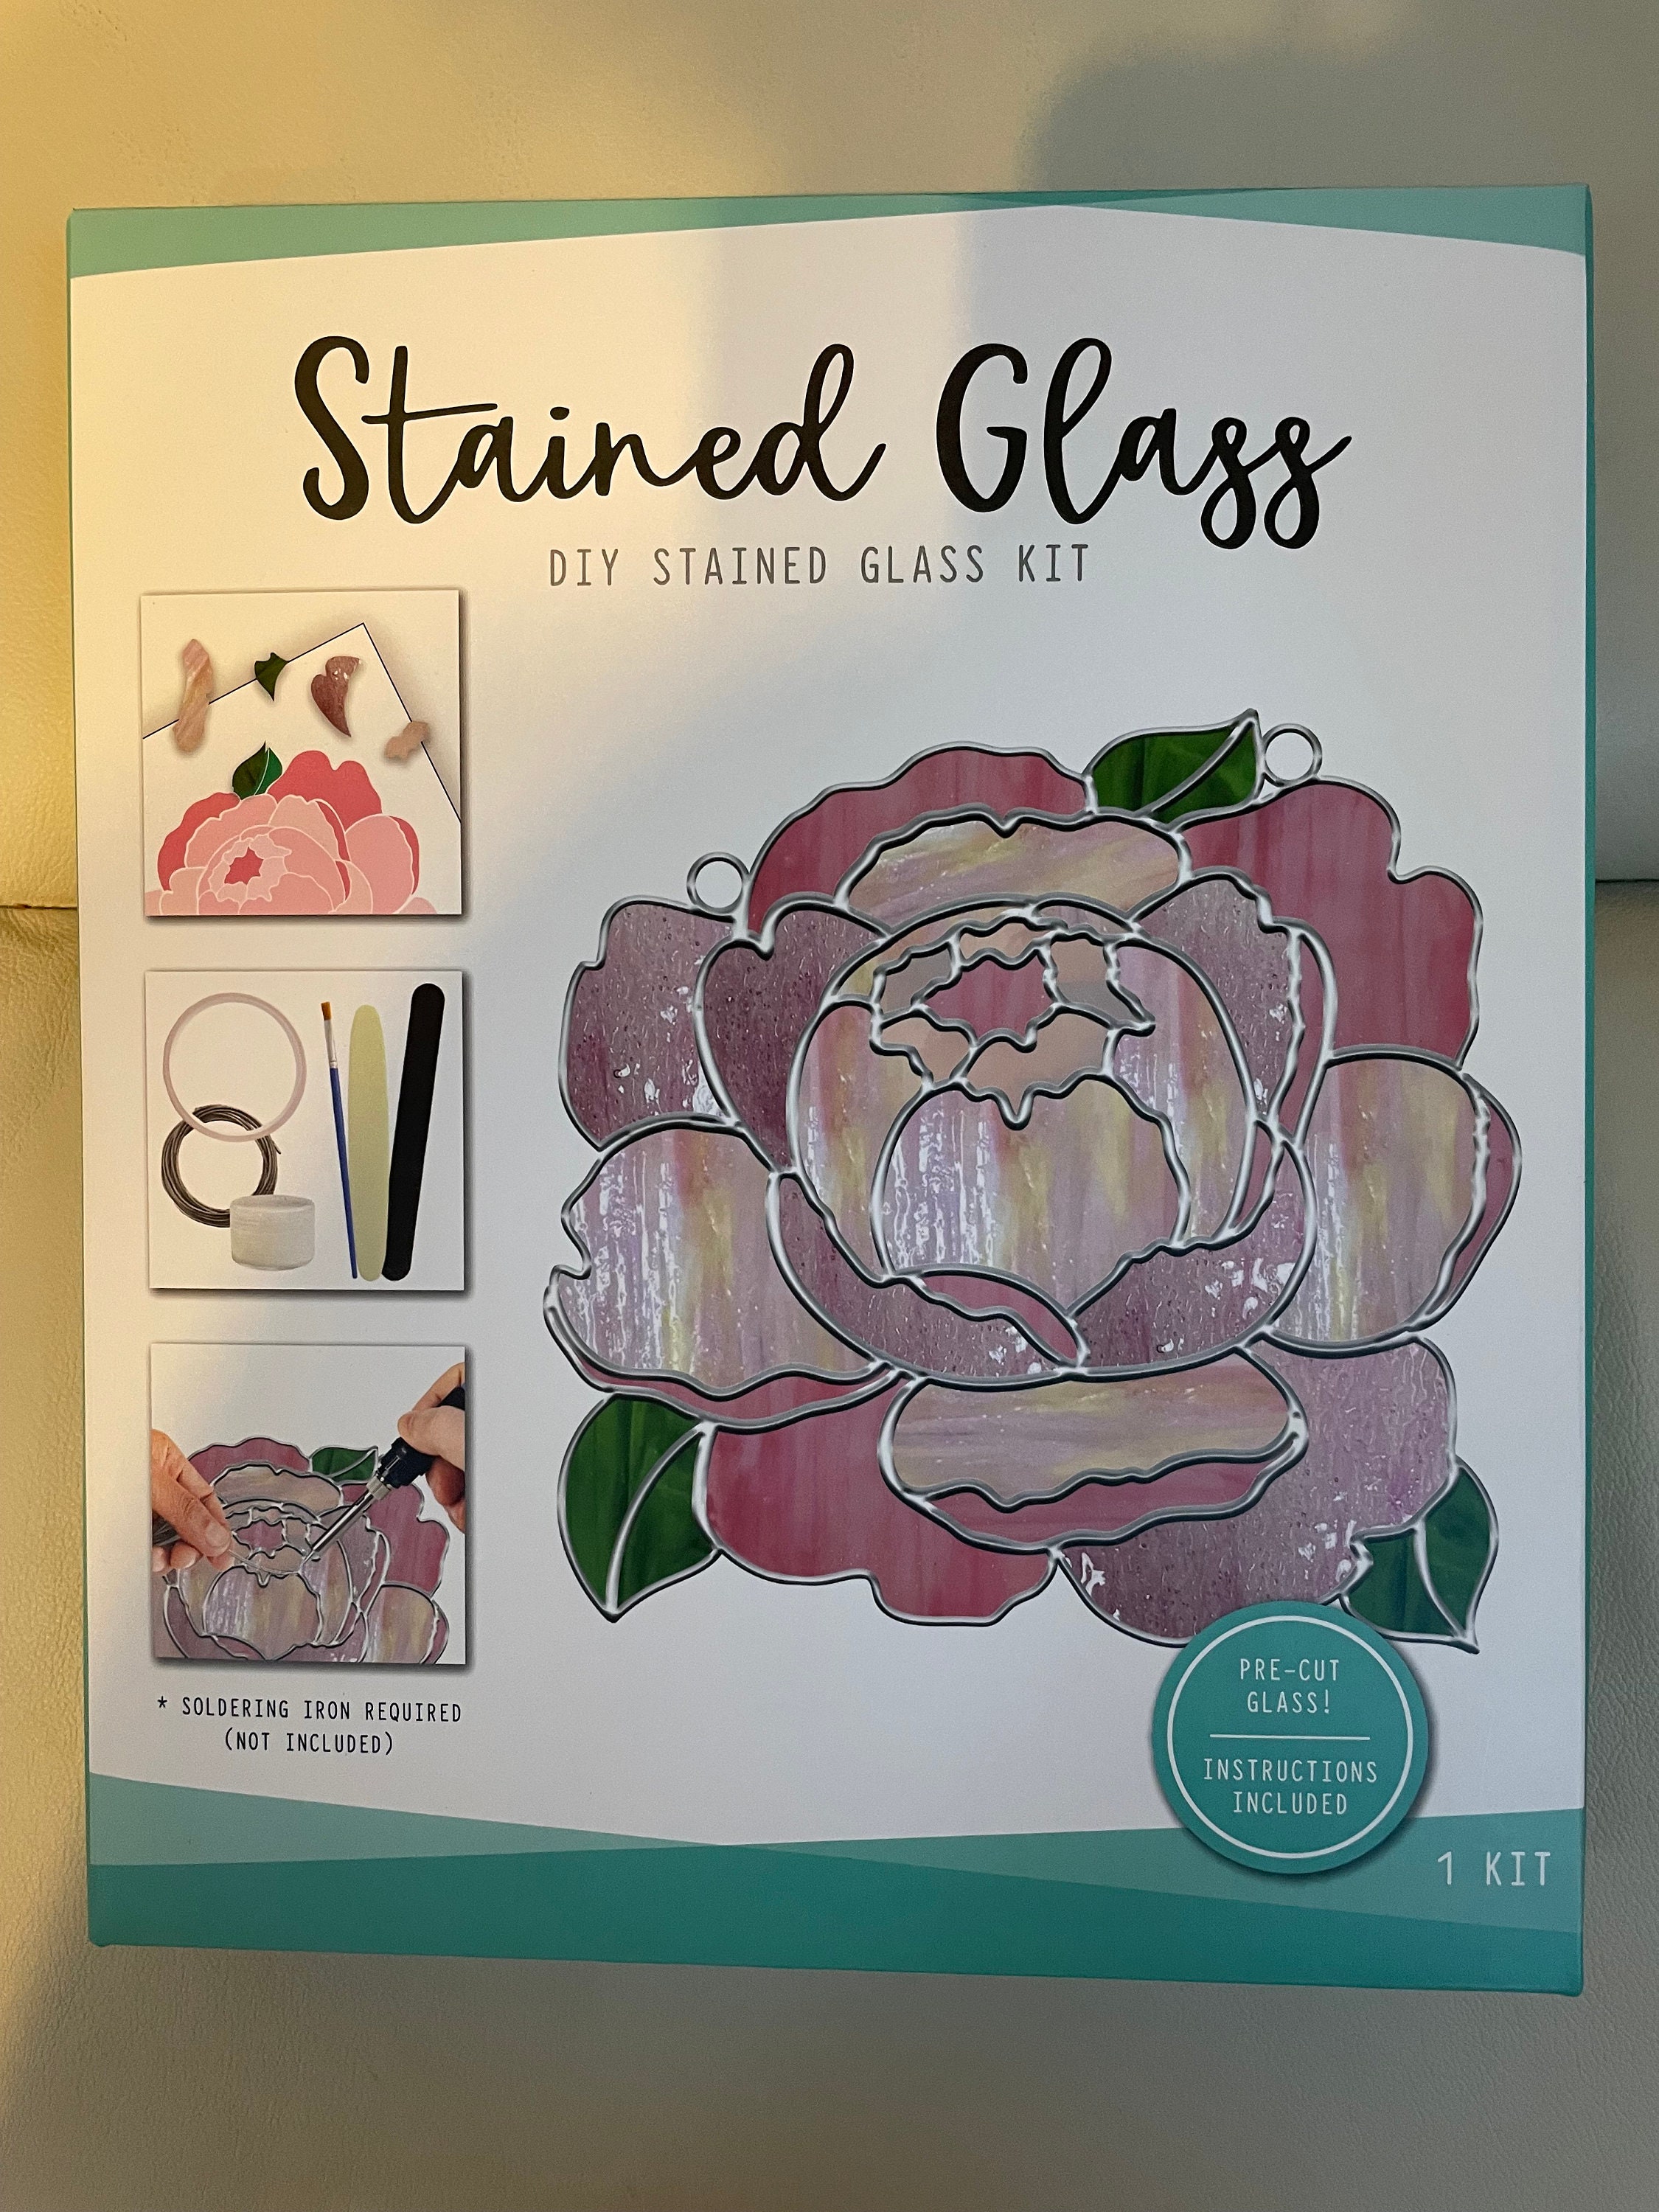 Stained Glass Start-Up Kit